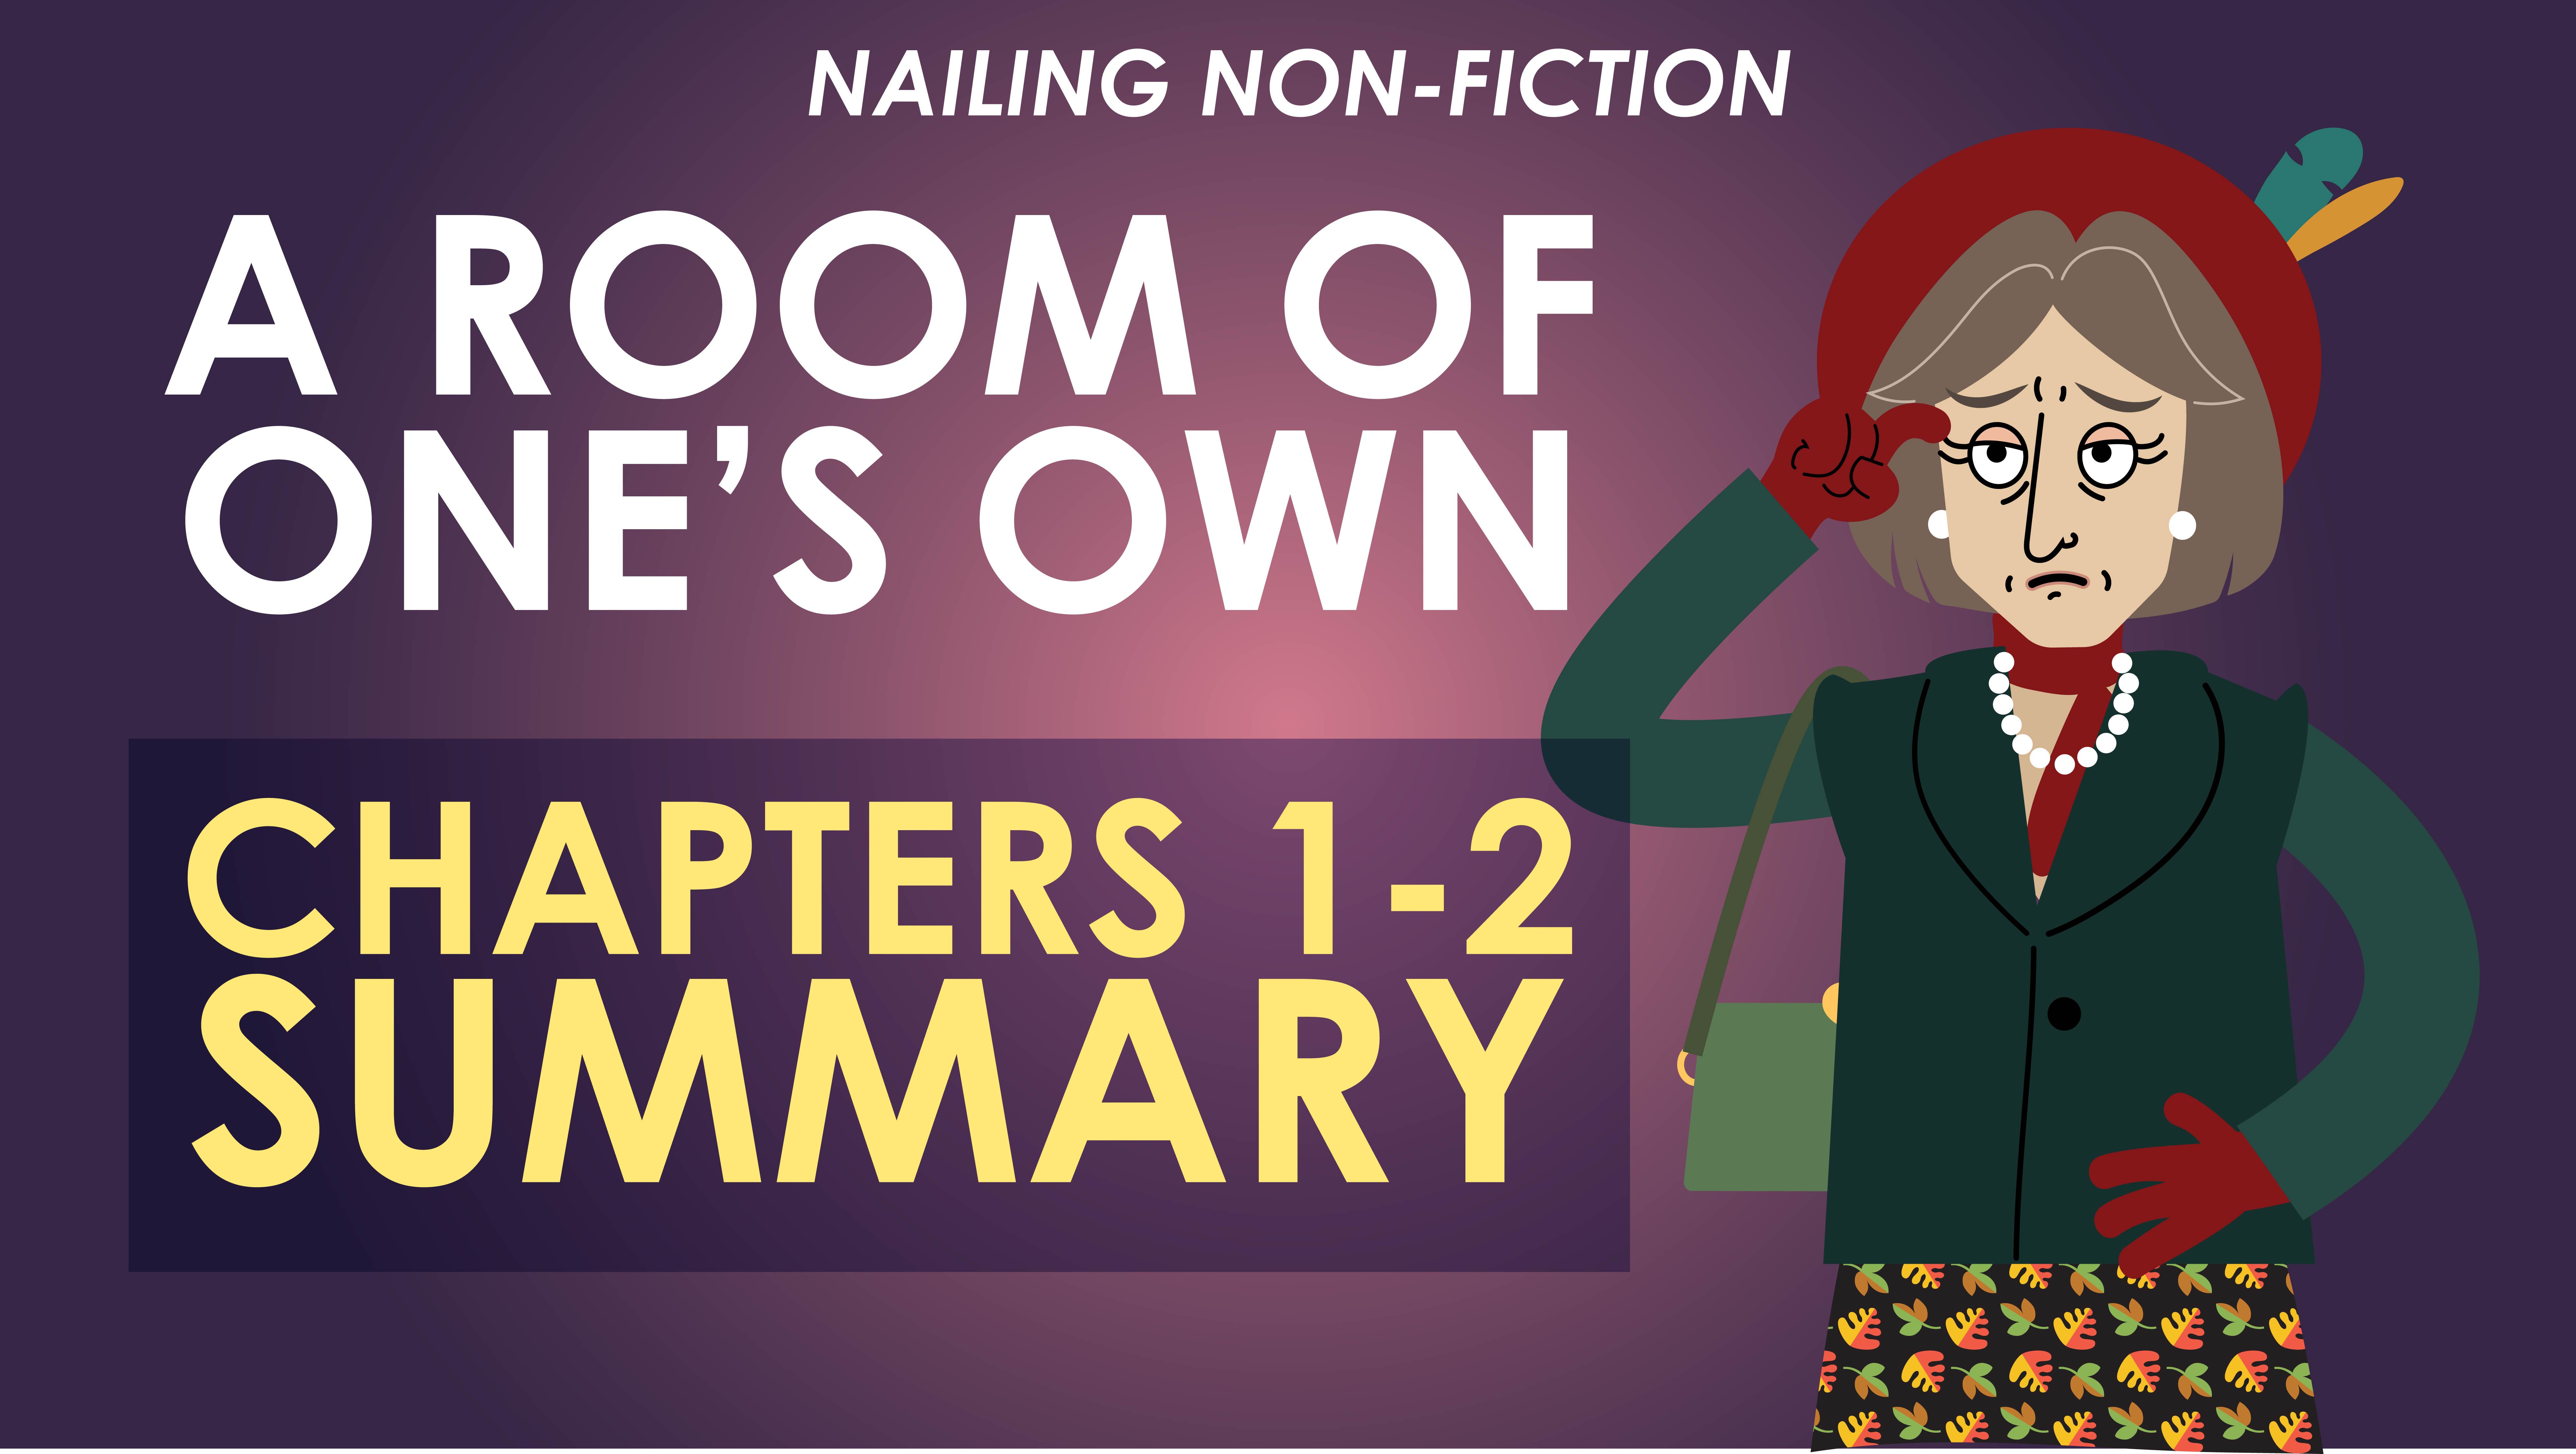 A Room of One's Own - Chapters 1-2 Summary - Nailing Non-Fiction Series